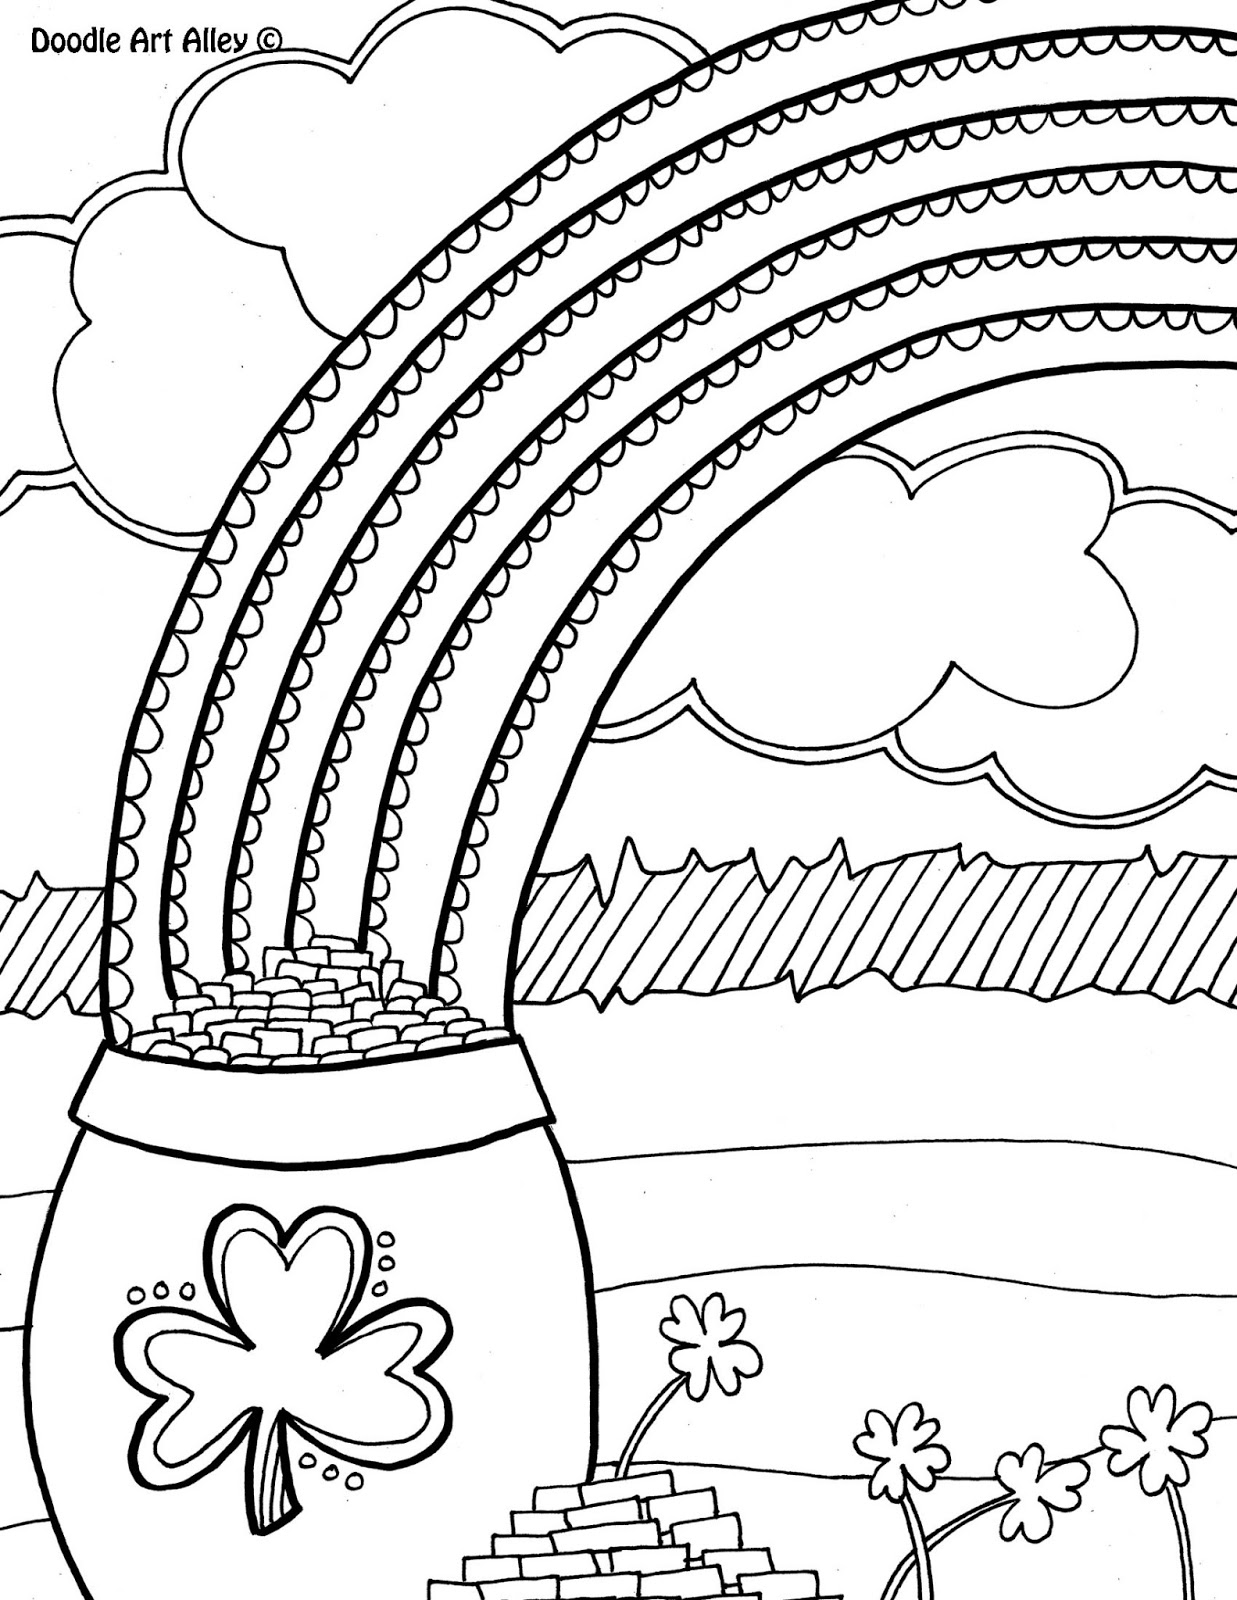 Teacher s Life Made Easy Free Awesome Coloring  Pages 